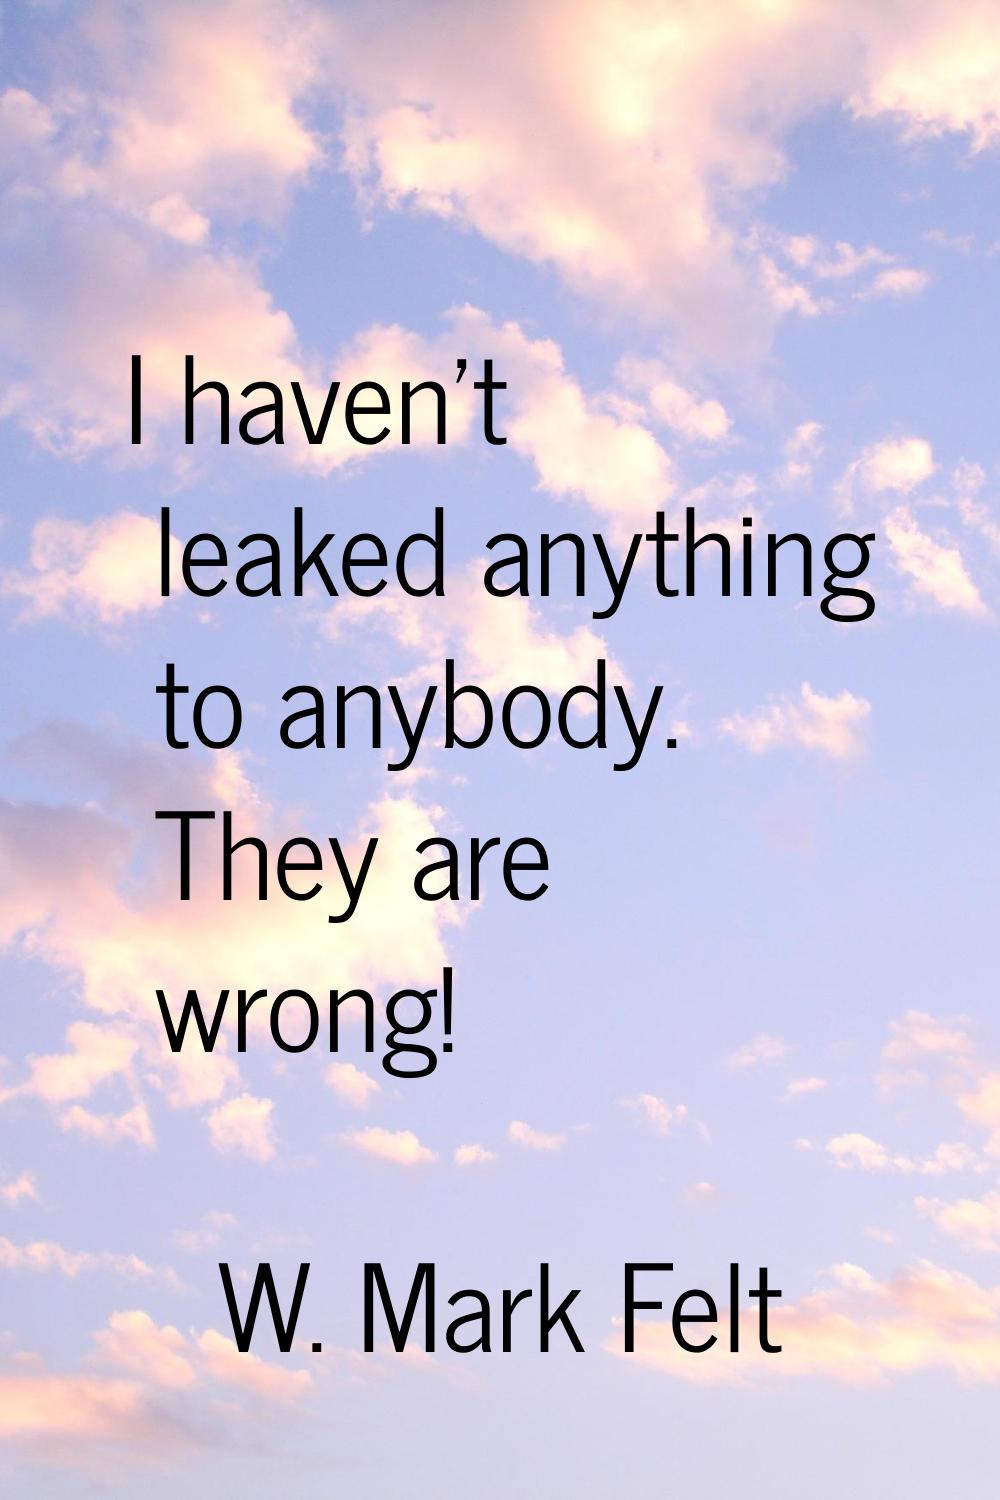 I haven't leaked anything to anybody. They are wrong!